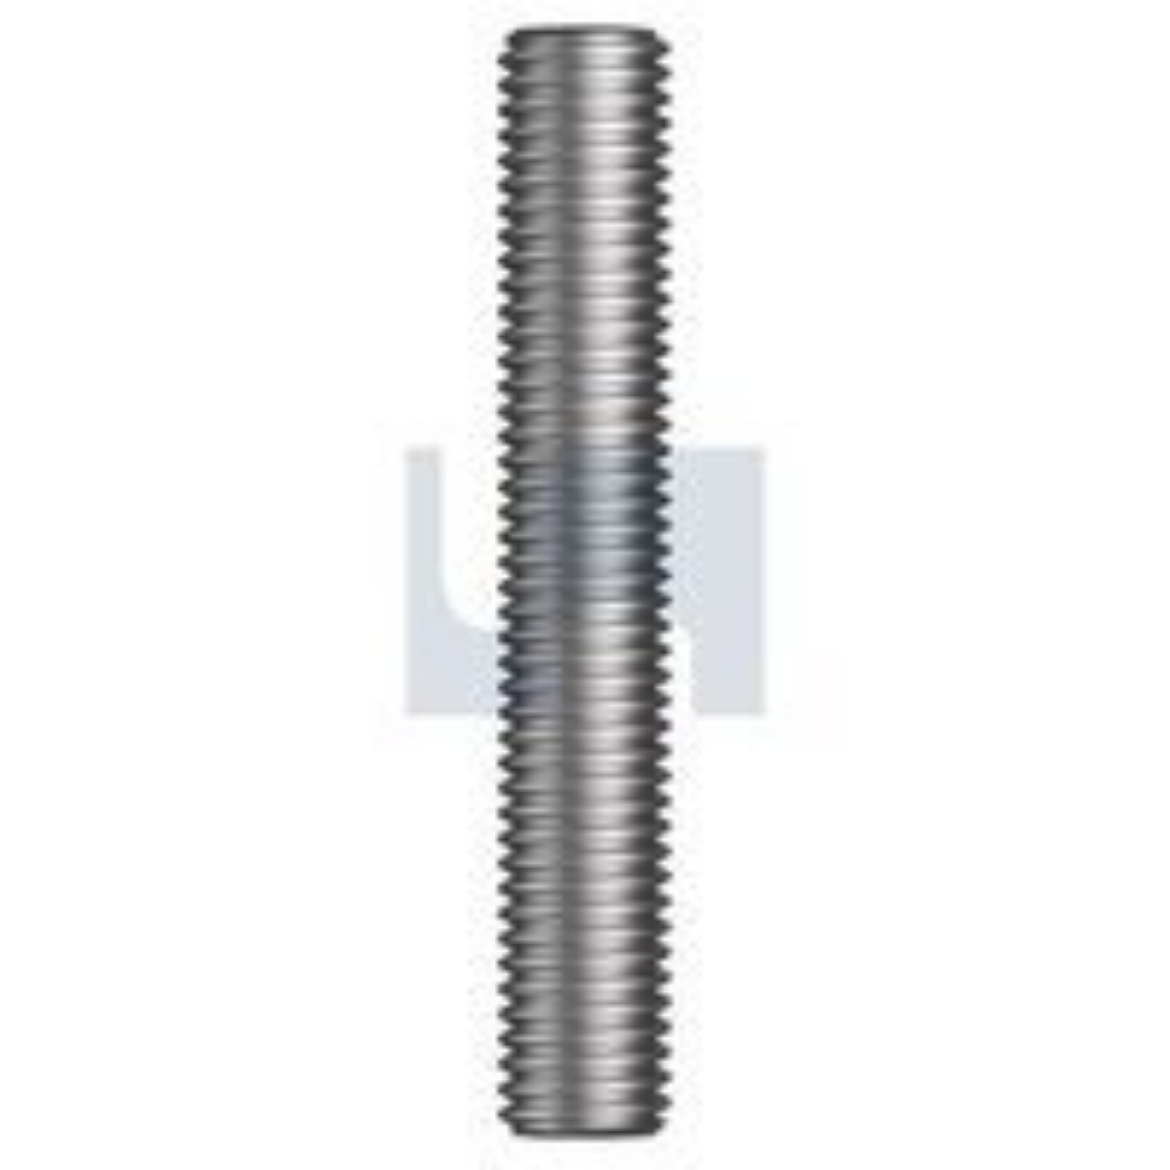 Picture of M12 x 3M THREADED ROD A4-70 DIN975 - STAINLESS STEEL